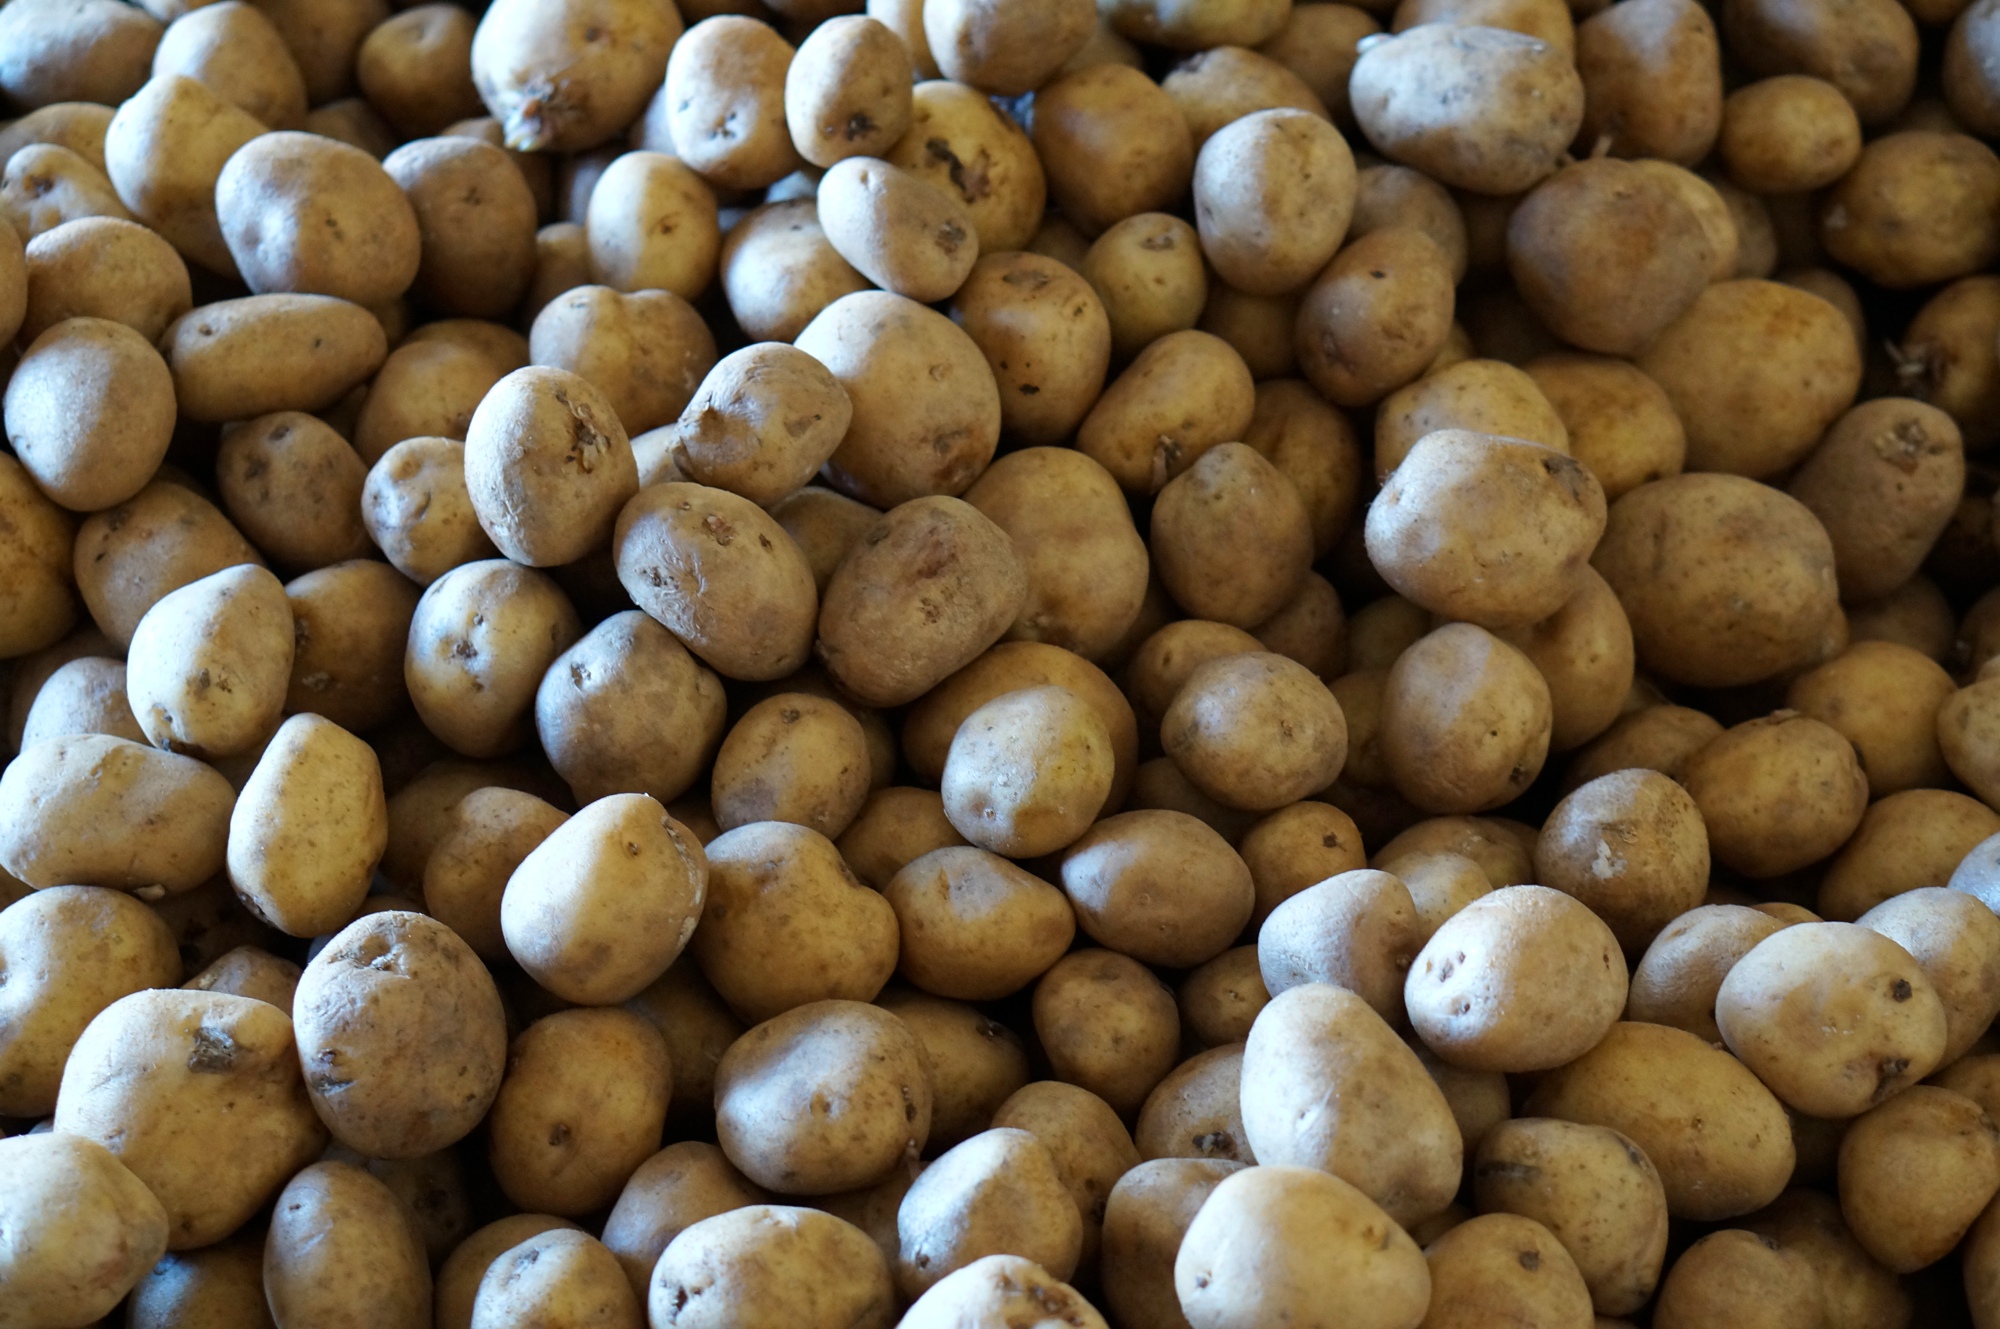 Seed potatoes for planting for fries and chips